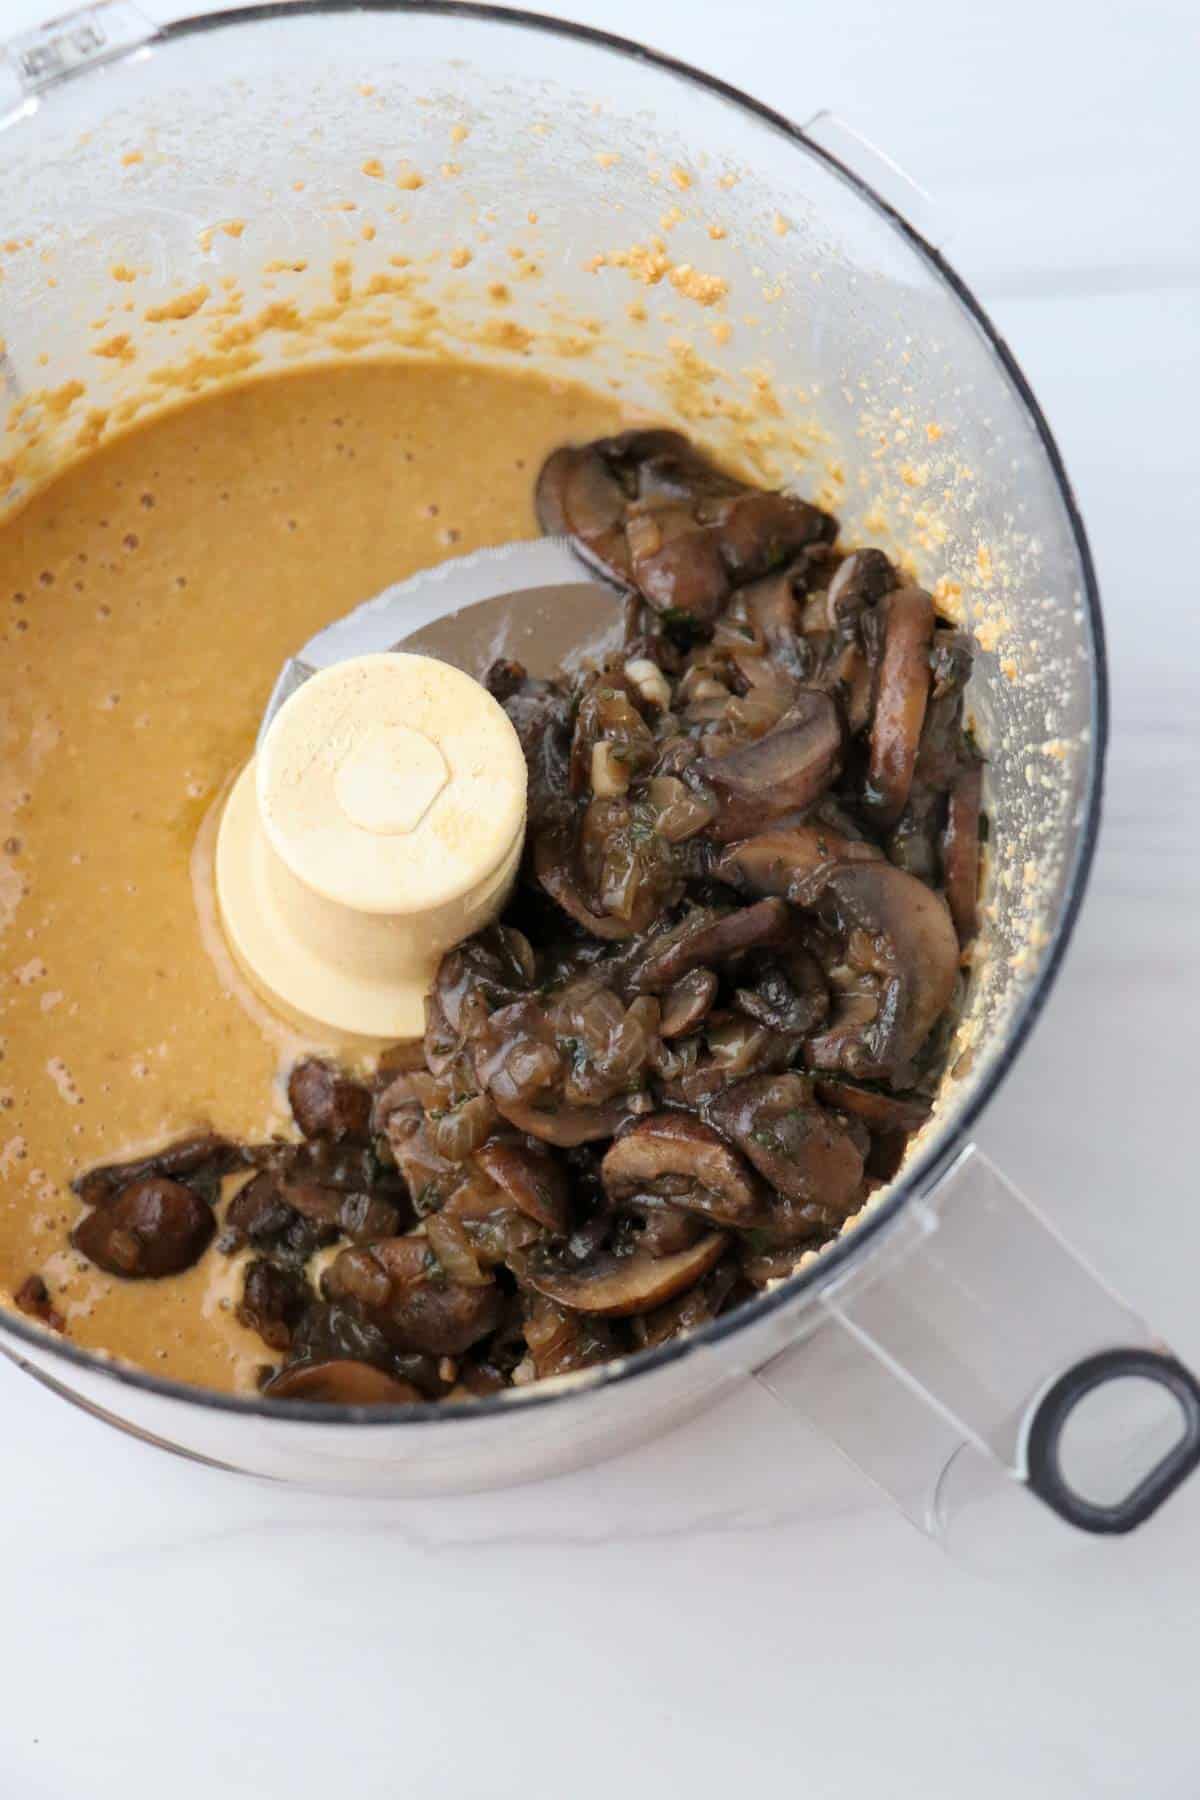 Almond paste and cooked mushrooms in a food processor.